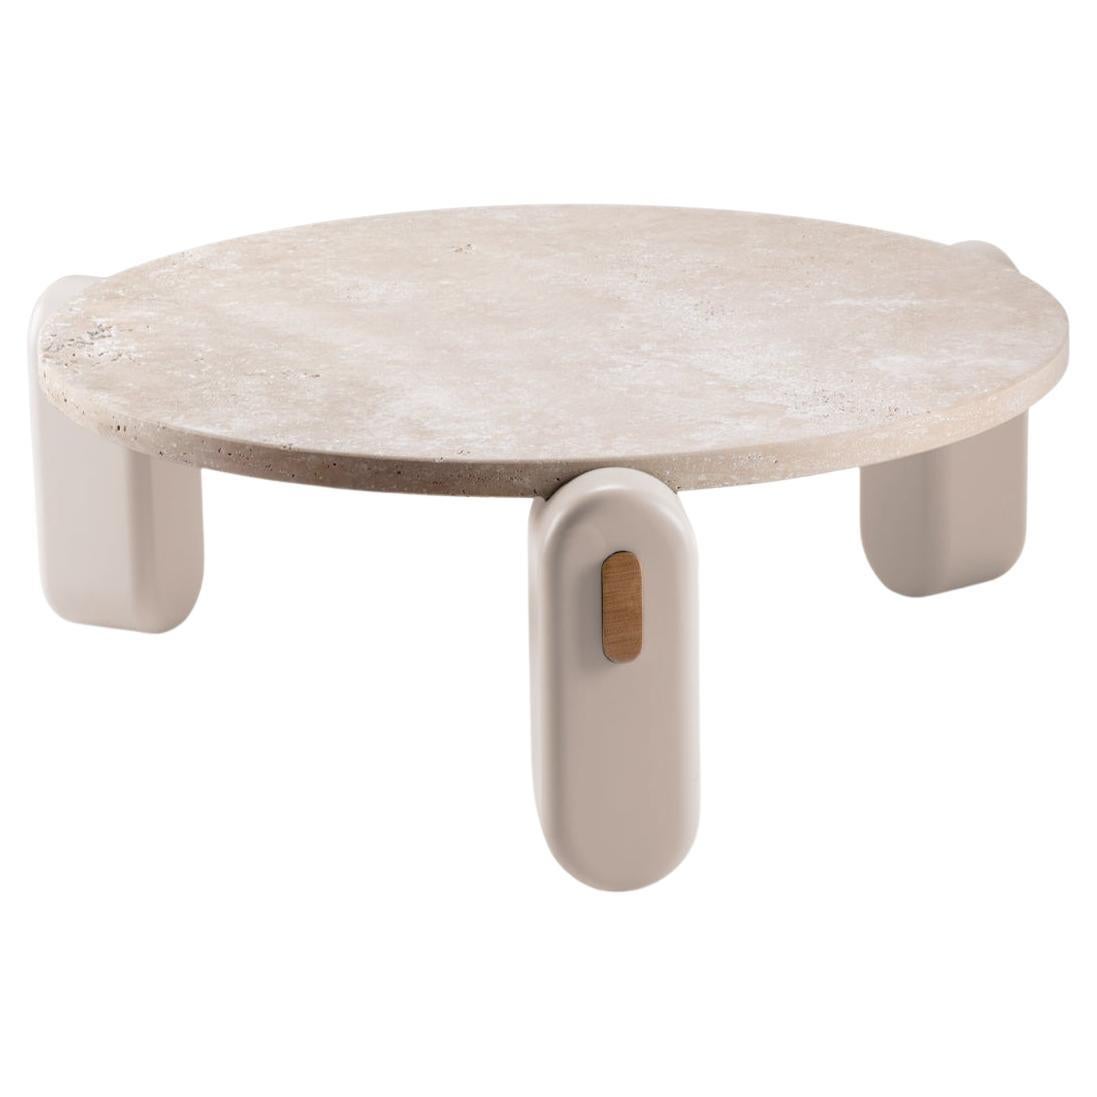 Mona Center Table with Travertine Top, Ivory Lacquered Feet and Wood Structure For Sale